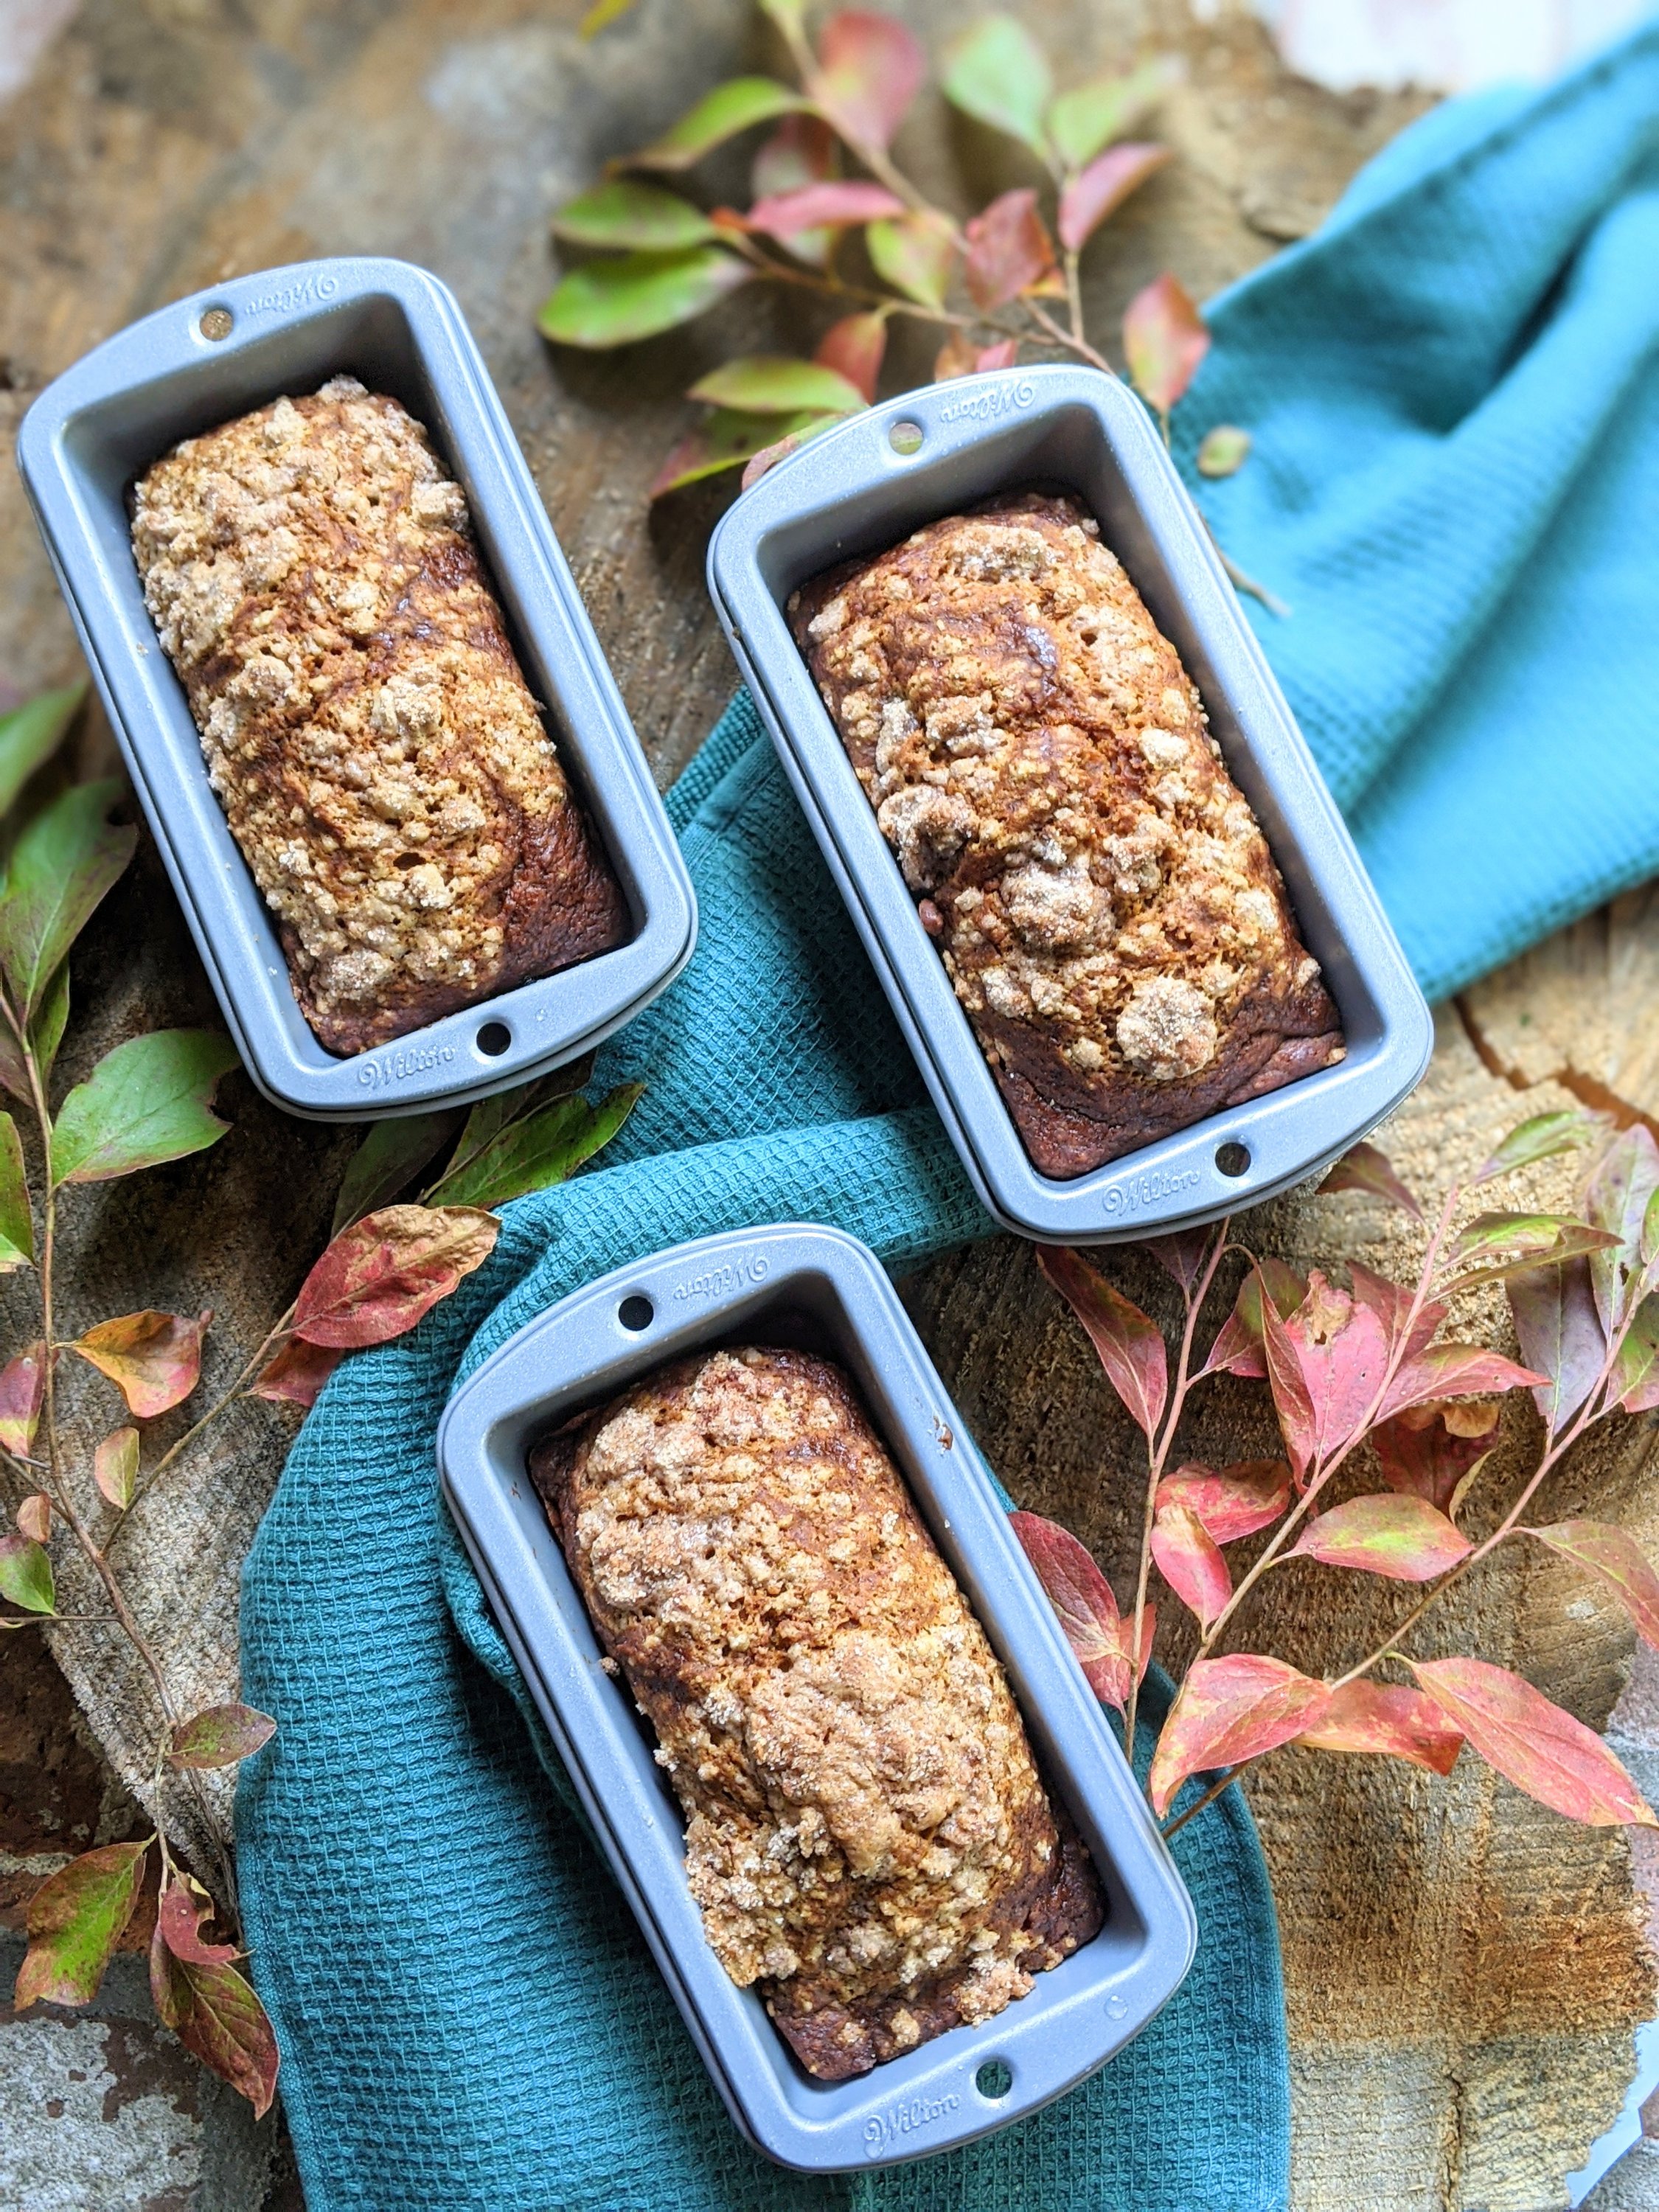 recpies for mini loaf pans vegan pumpkin breads healthy vegetarian gluten free option egg free dairy free recipes for fall autumn weather